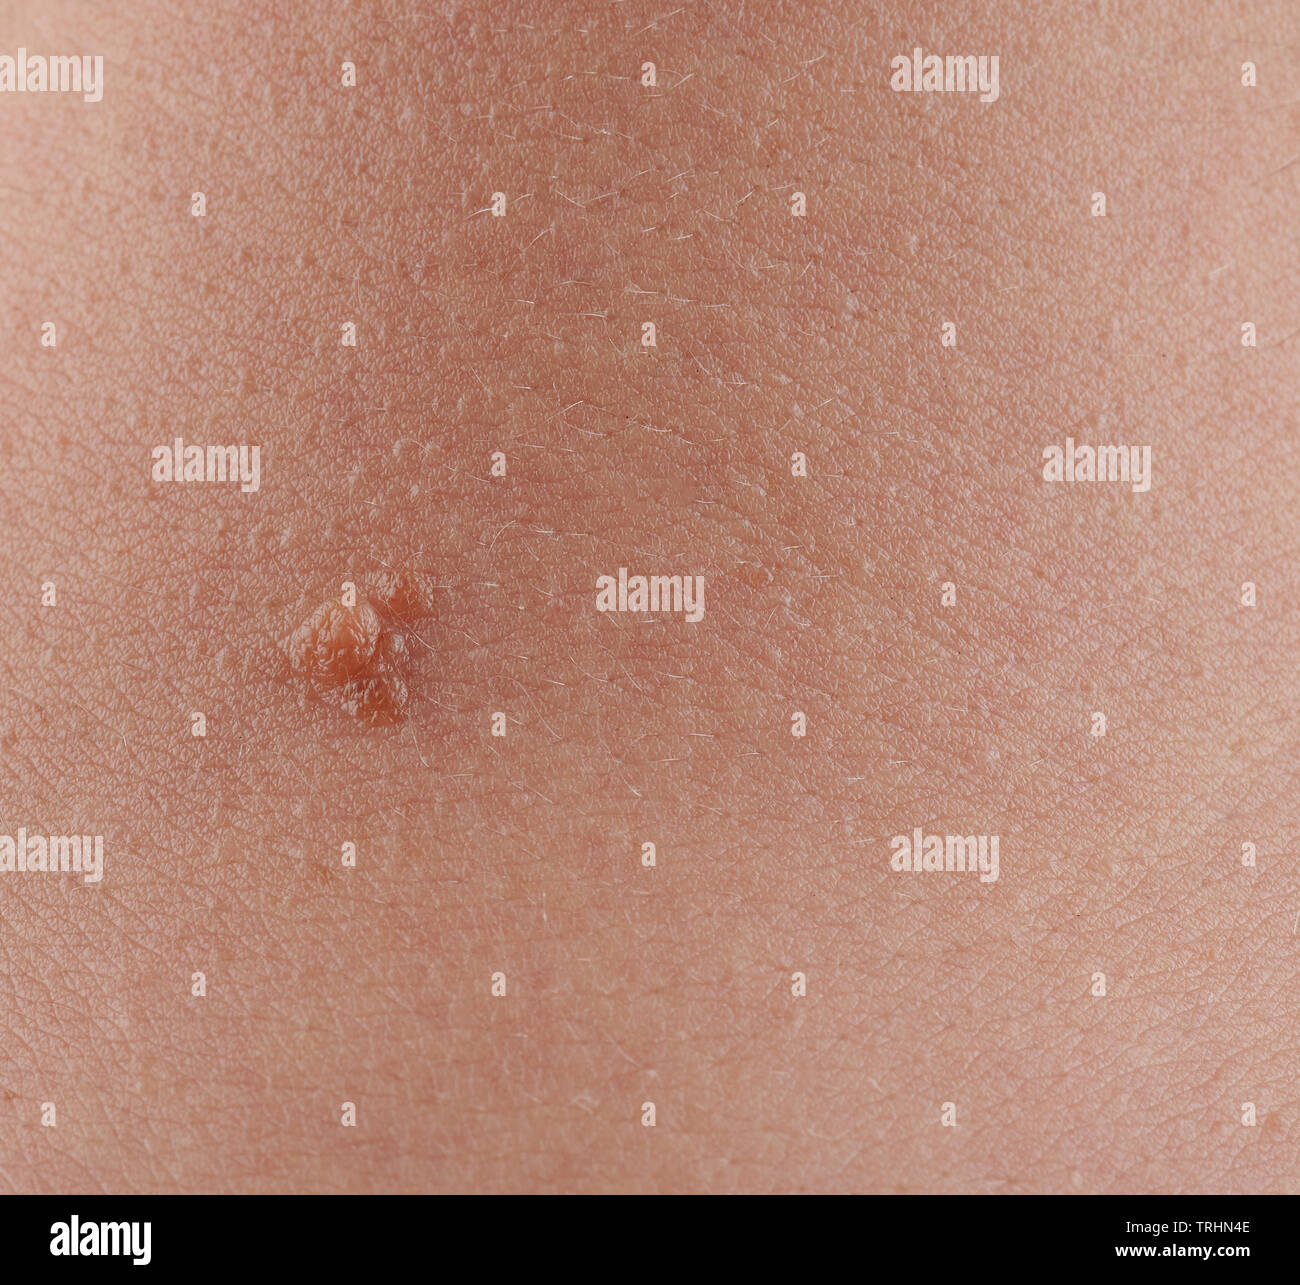 One mole spot on human skin close up view Stock Photo